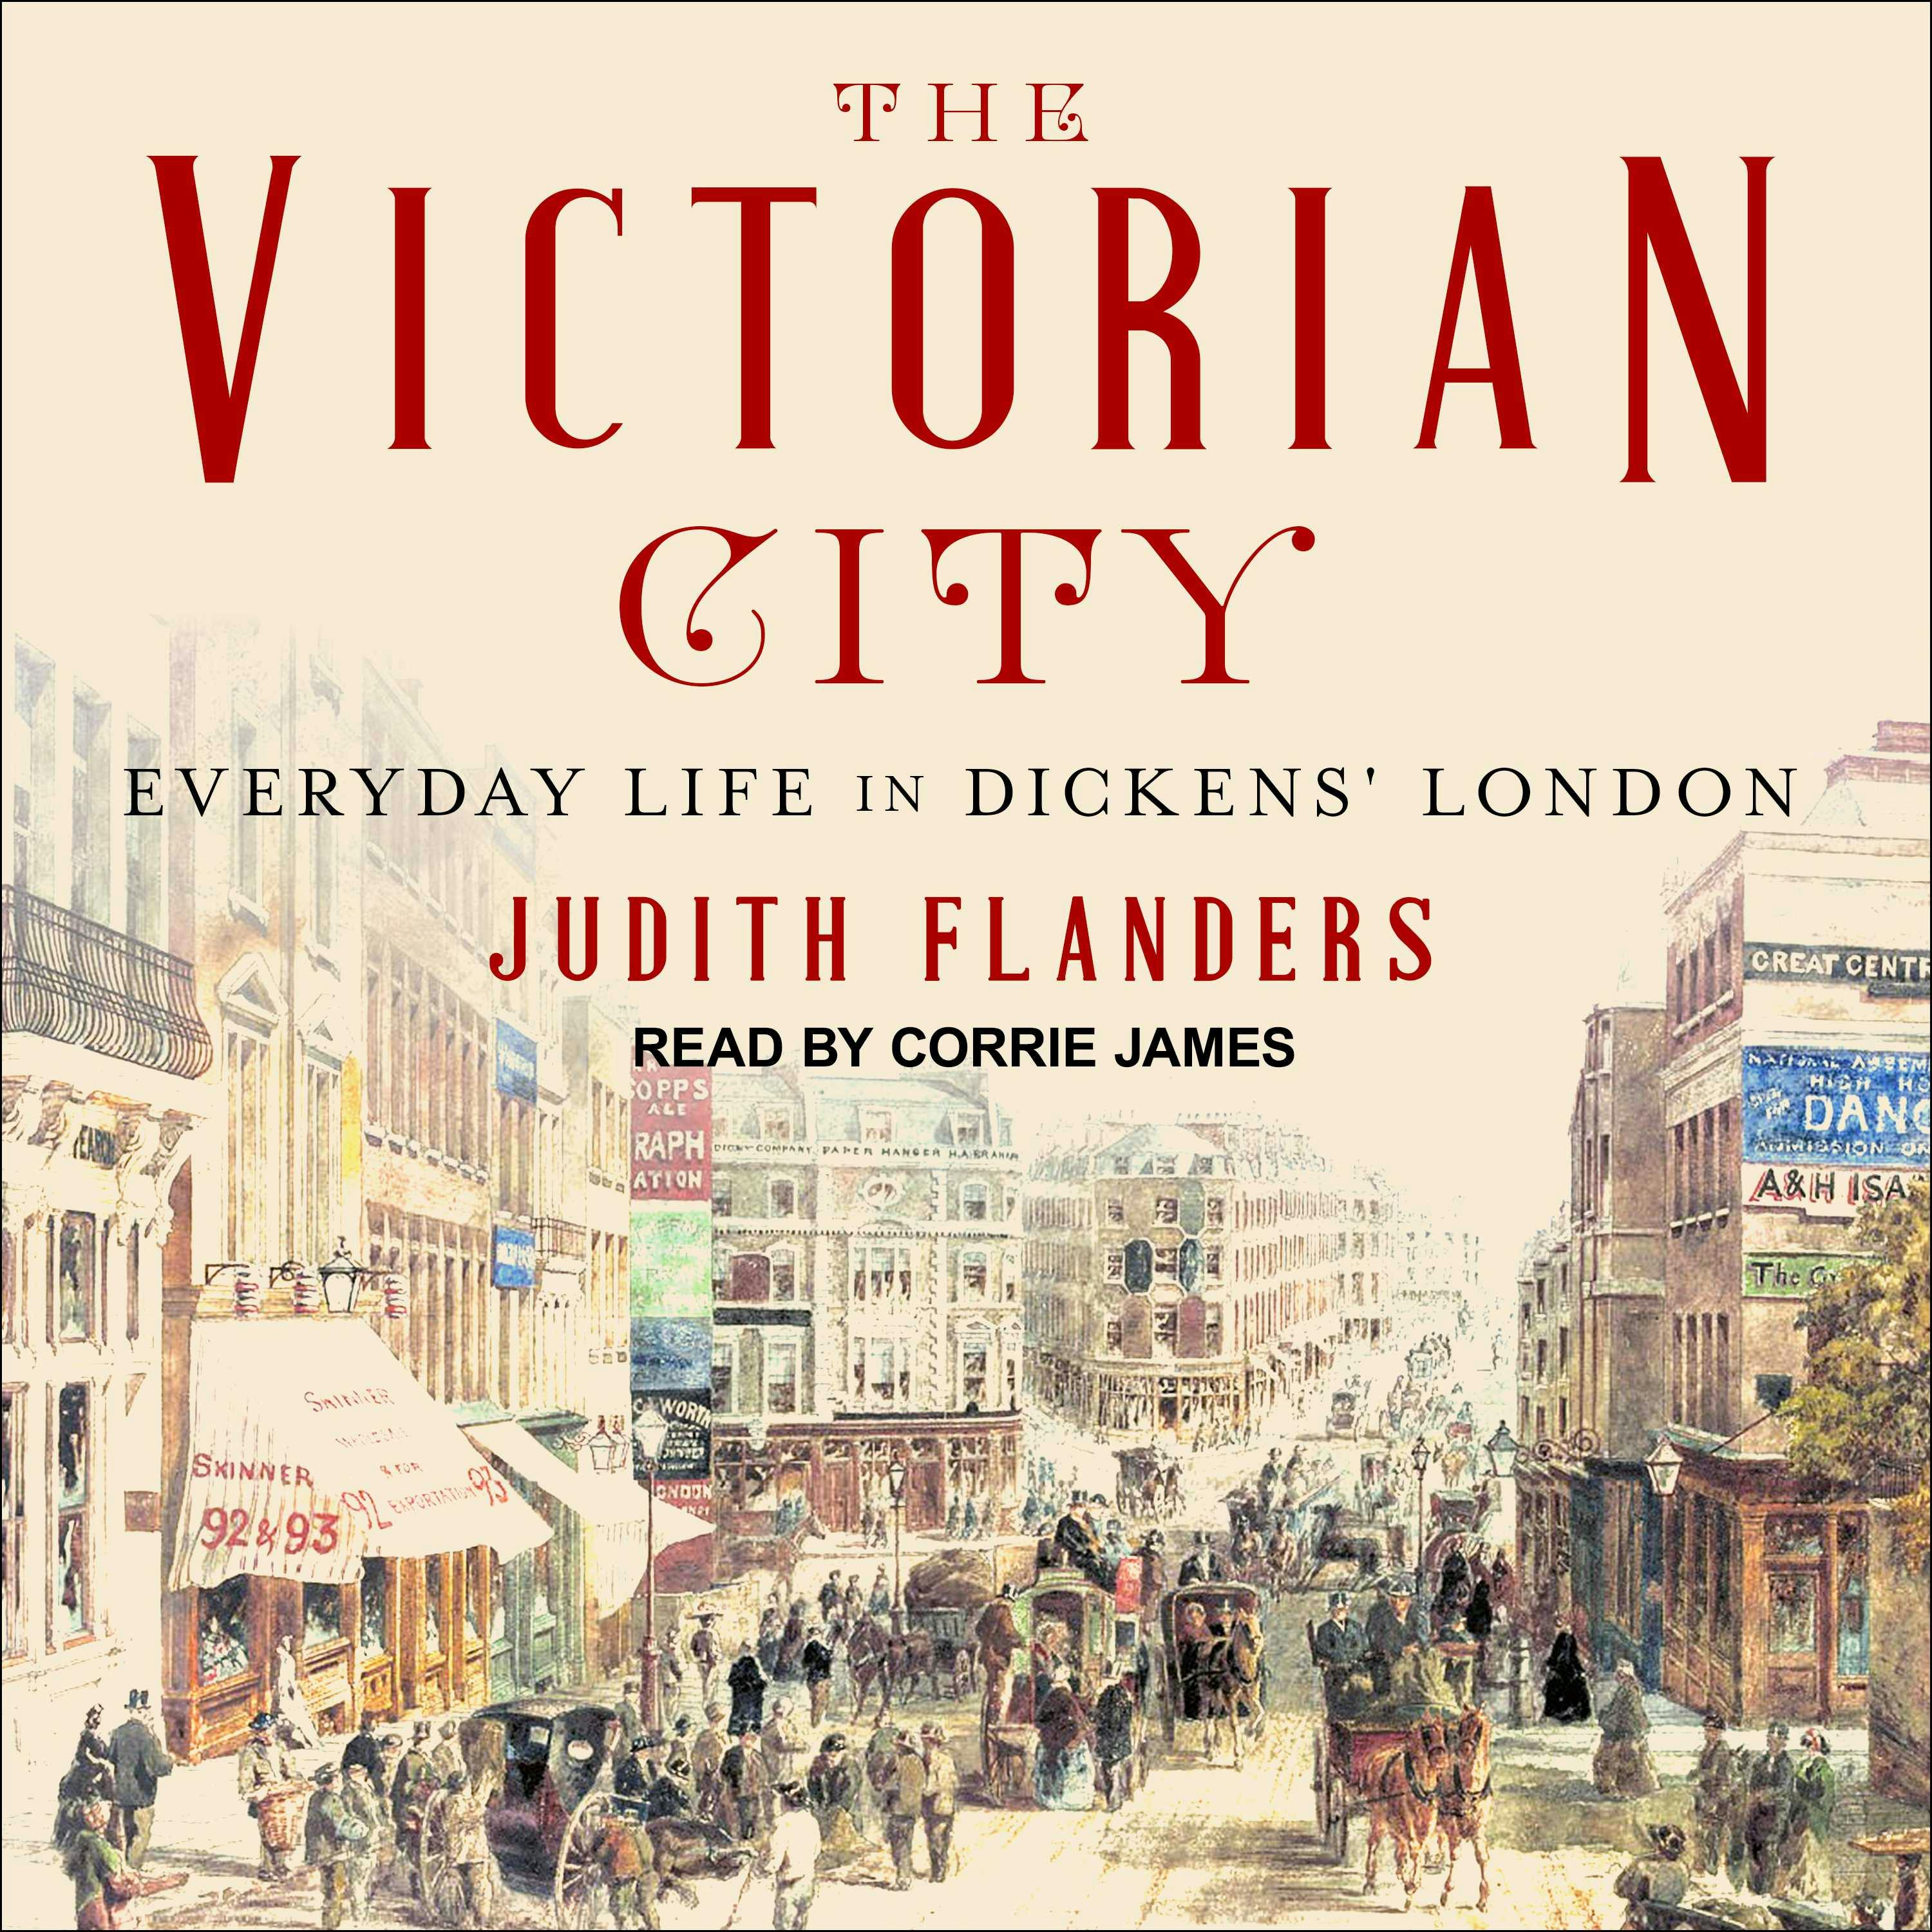 The Victorian City: Everyday Life in Dickens' London - Judith Flanders